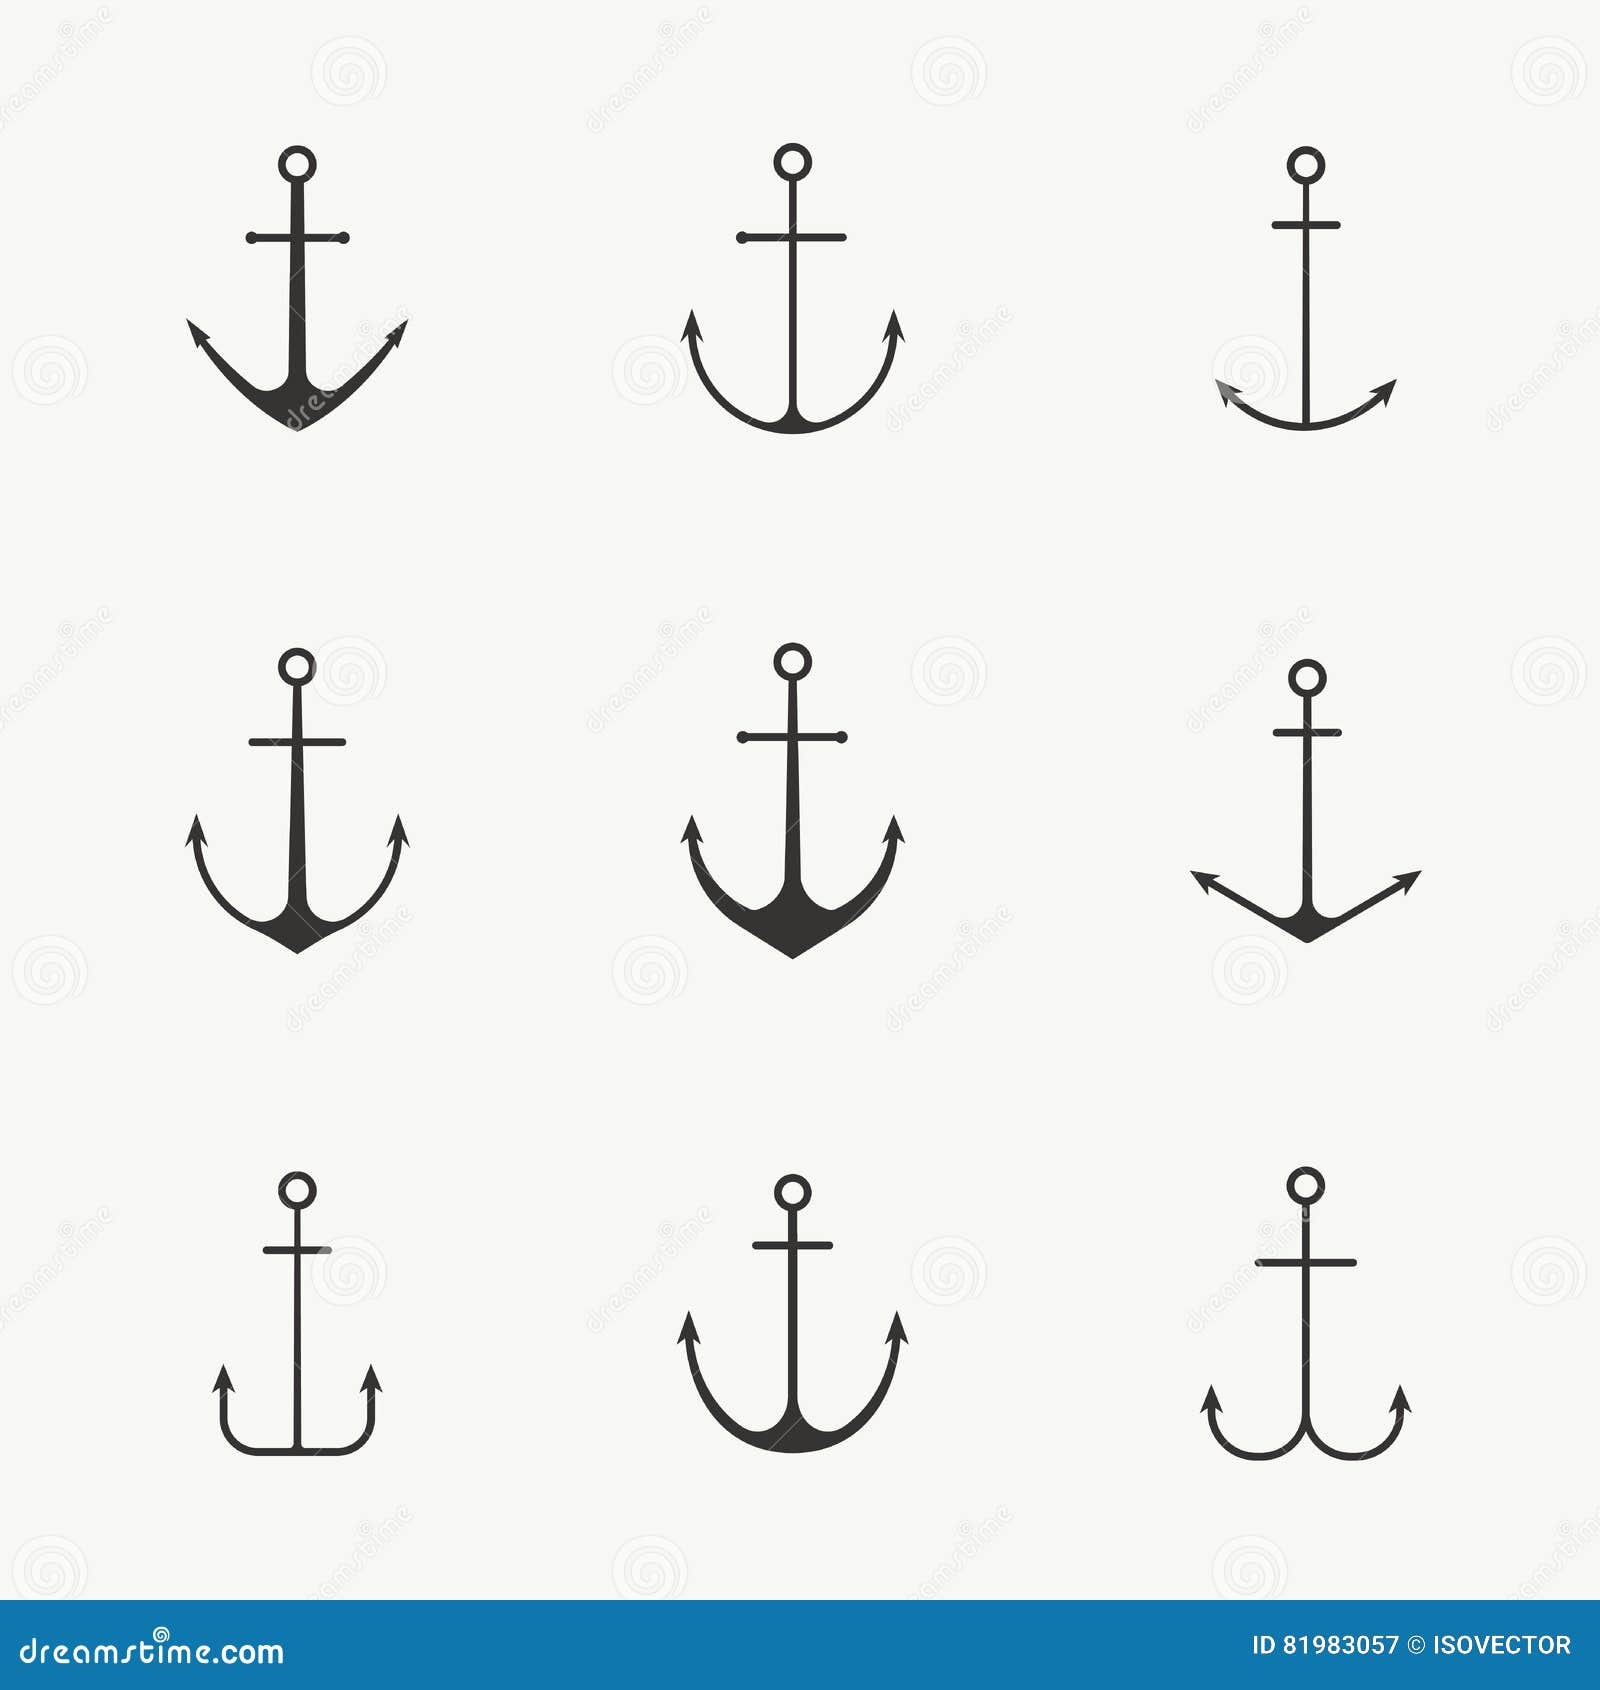 Anchor Tattoo Designs - Browse Now! (31 Ideas) | Inkbox™